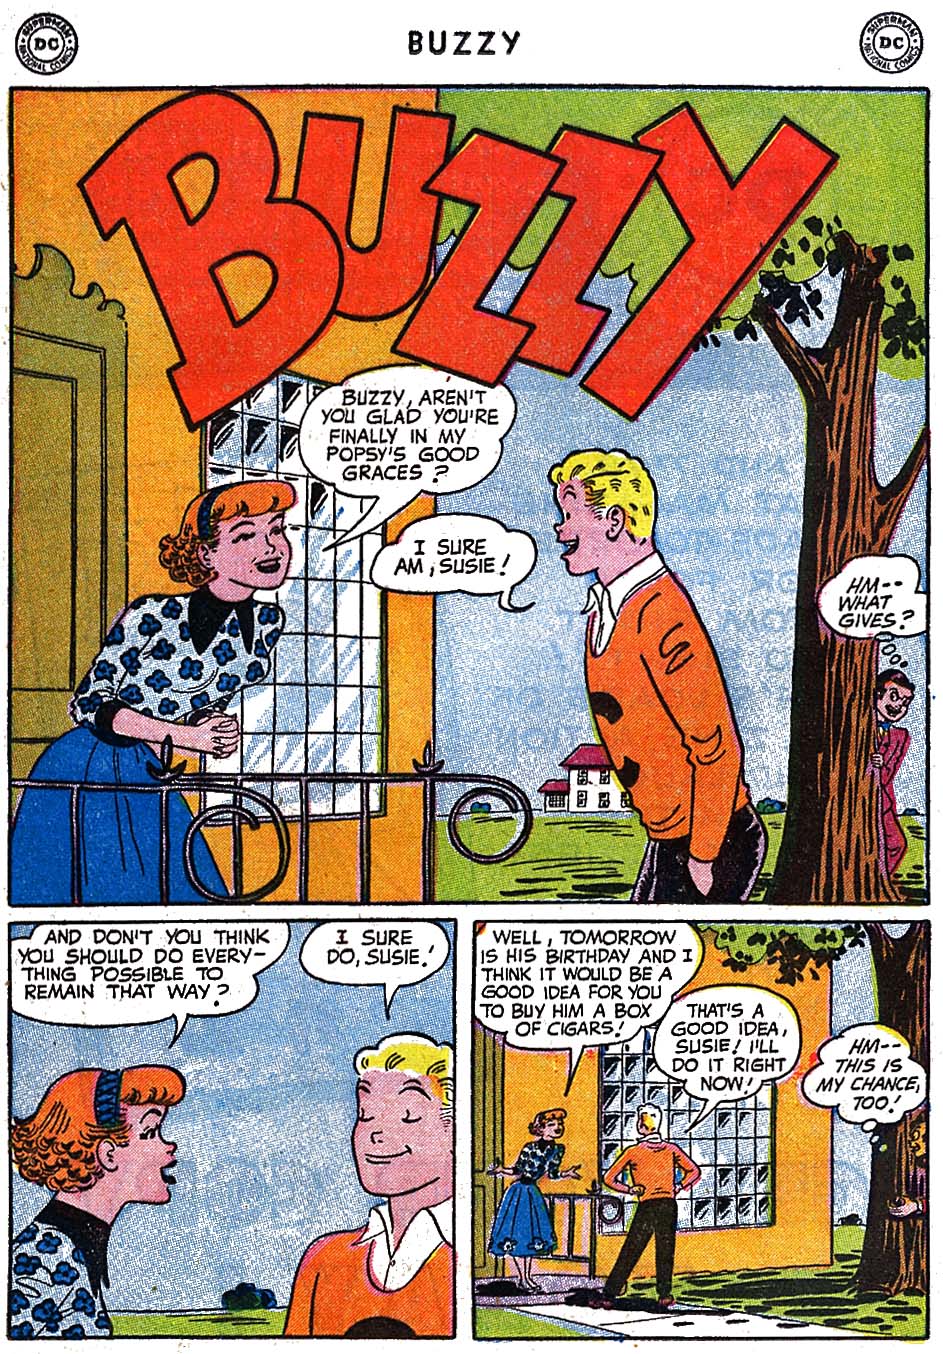 Read online Buzzy comic -  Issue #55 - 18